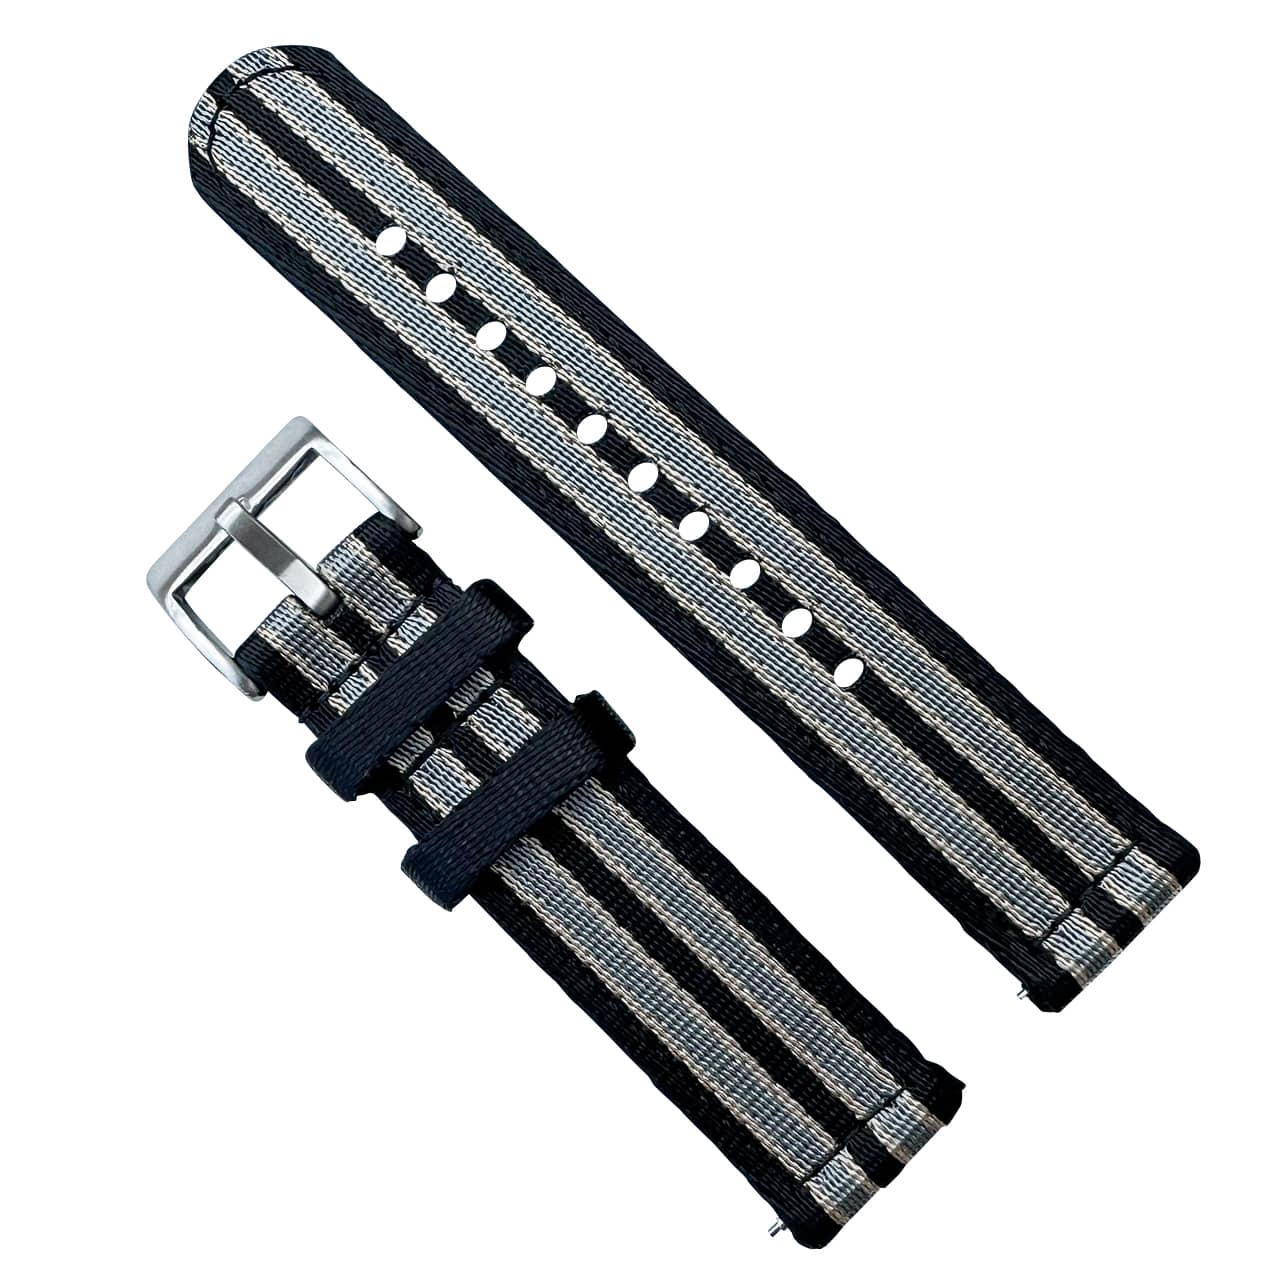 Military Style Two Piece Quick Release Watch Strap Black Beige Grey Bond No Time To Die 1